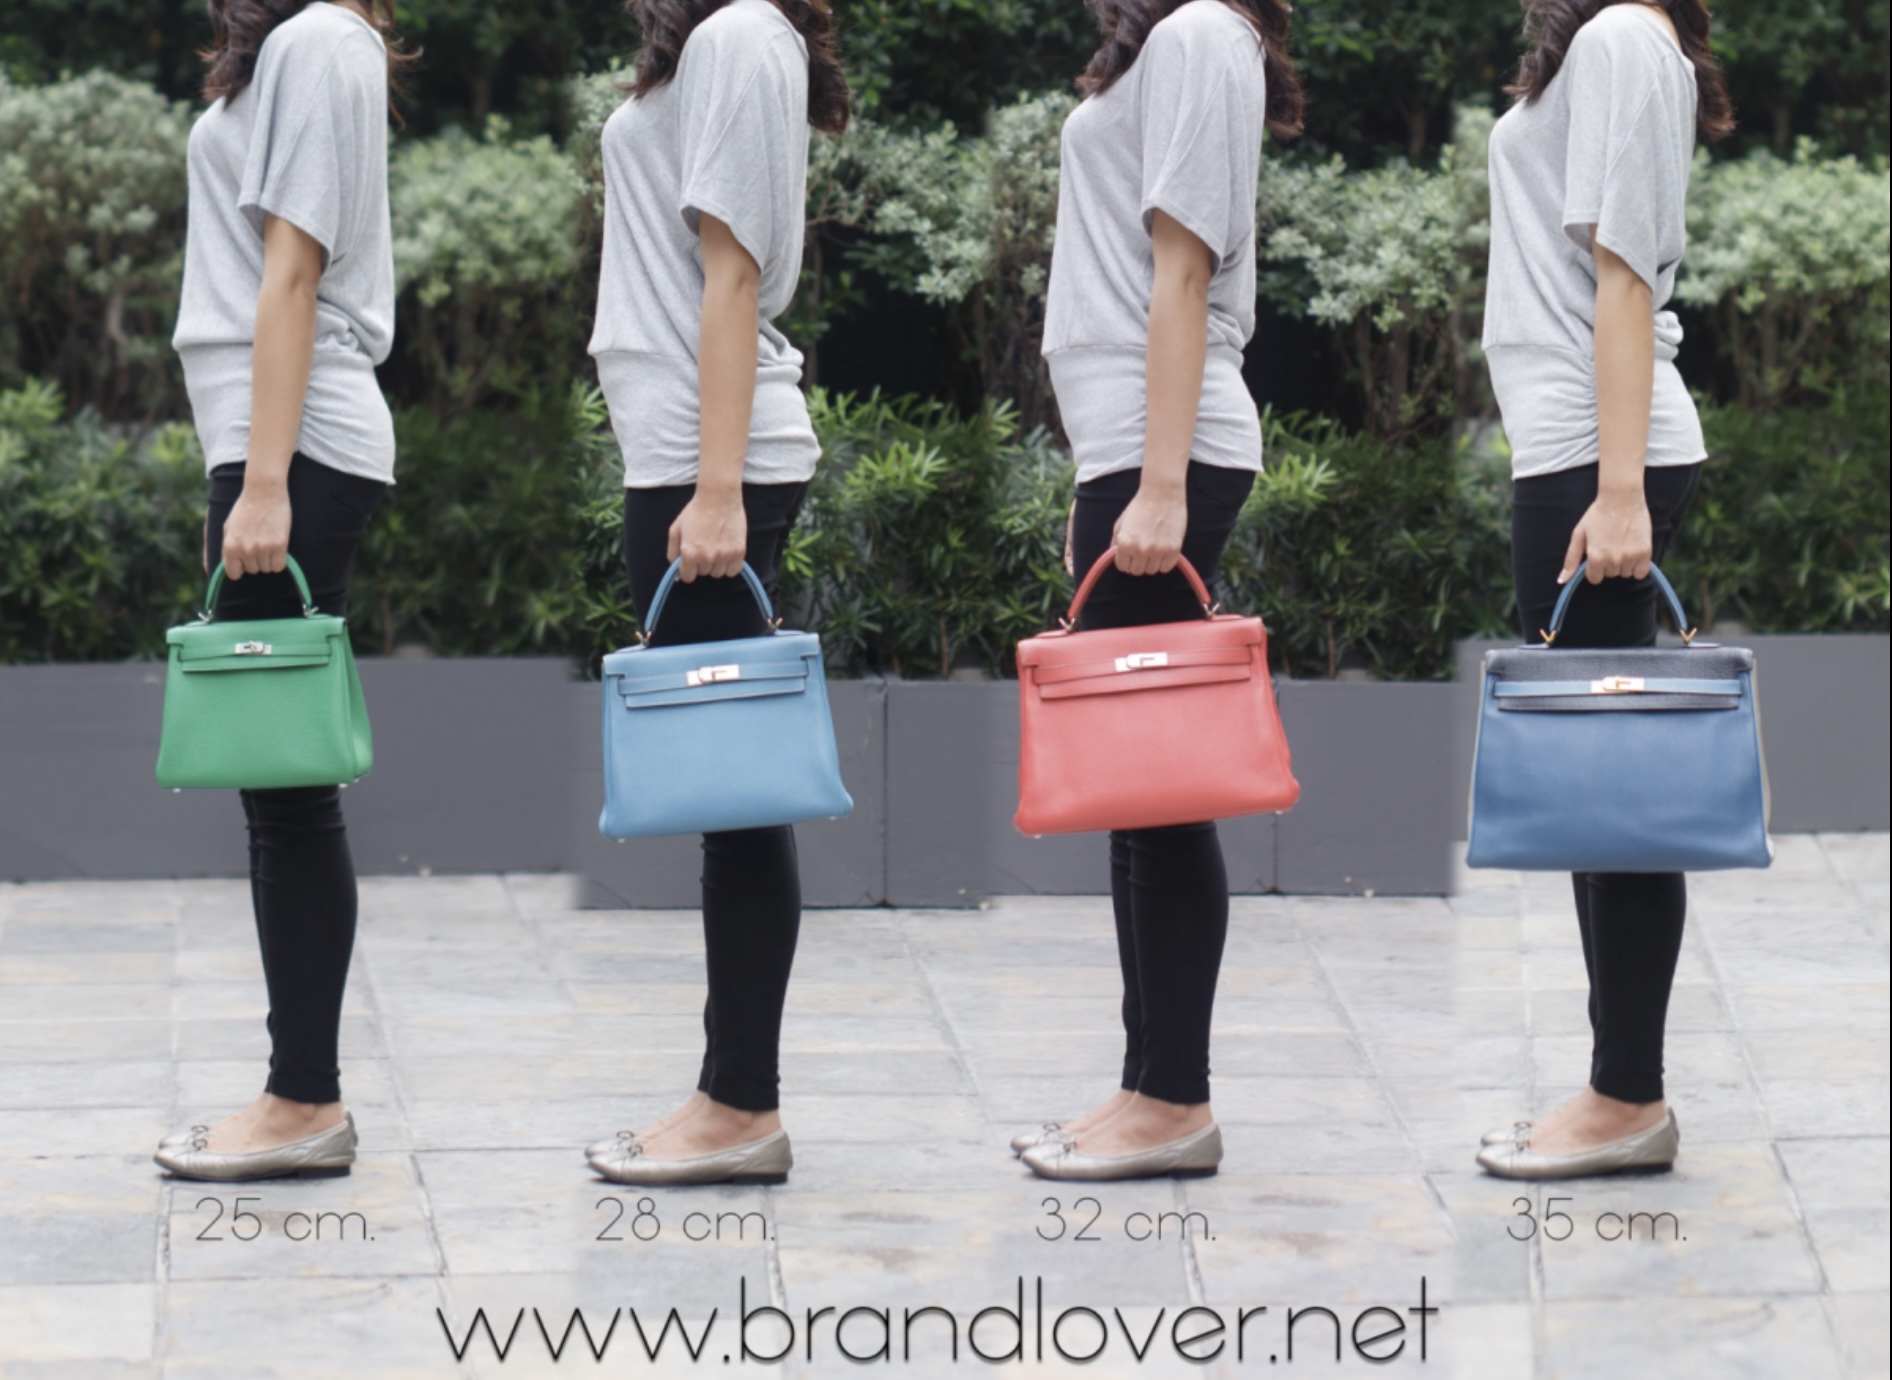 HERMES KELLY 25, 28 AND 32, EVERYTHING YOU NEED TO KNOW, COMPARISON VIDEO